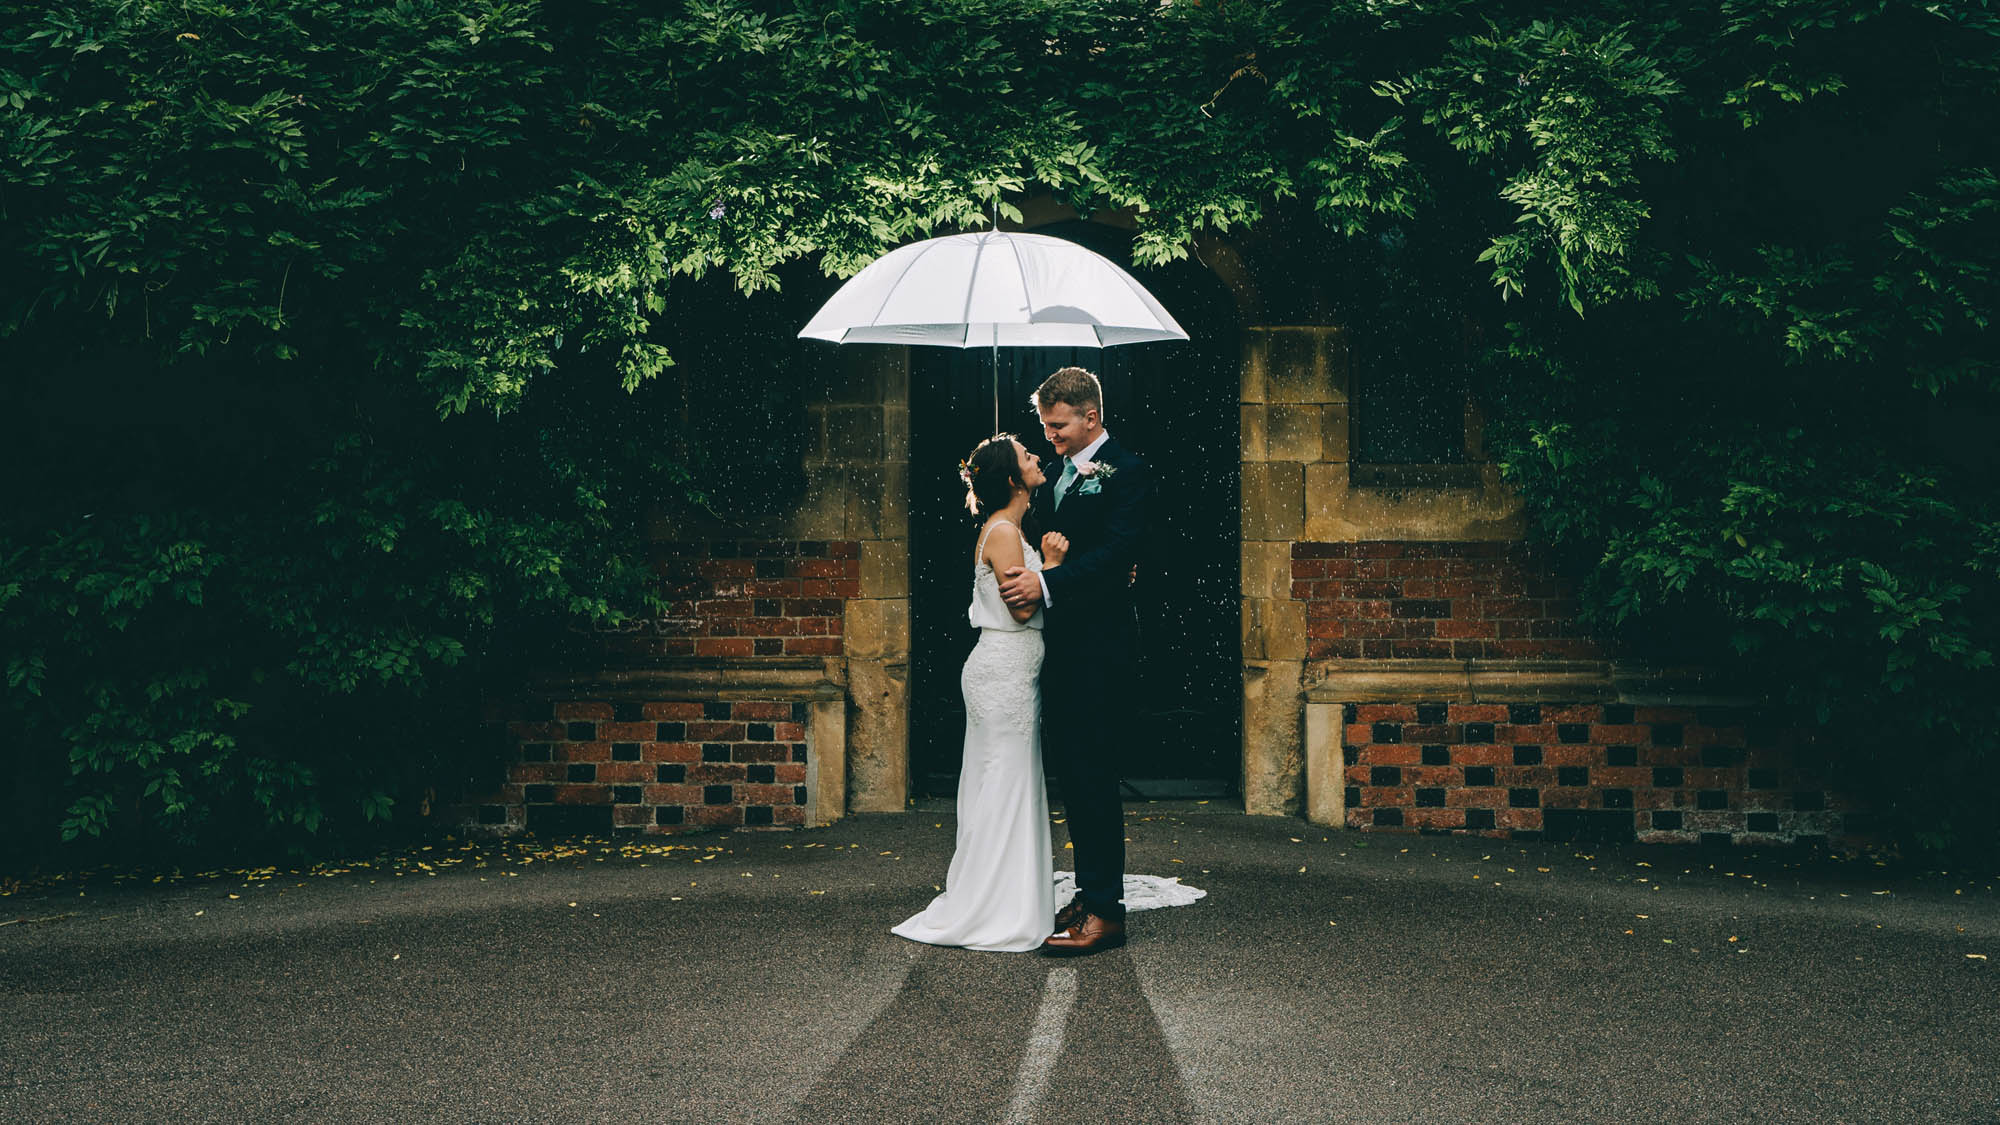 Beautifully lit wedding photo with a white umbrella. A bride and groom stand in a courtyard facing each other. By Abraham Photography